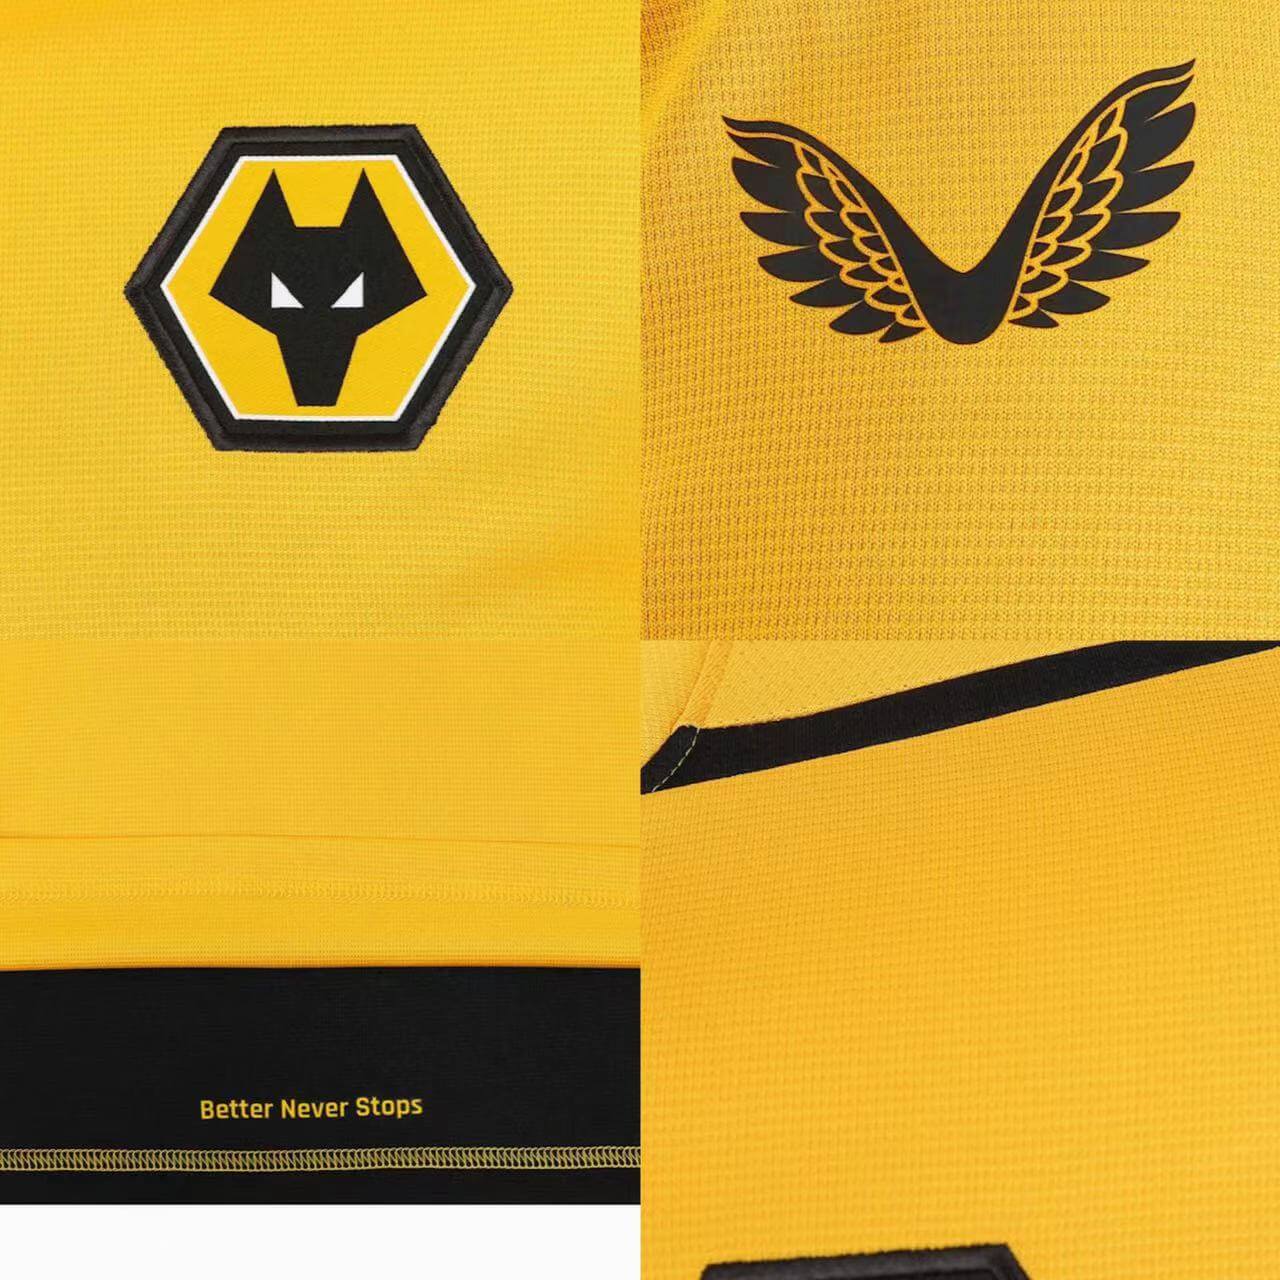 new Wolves home jersey